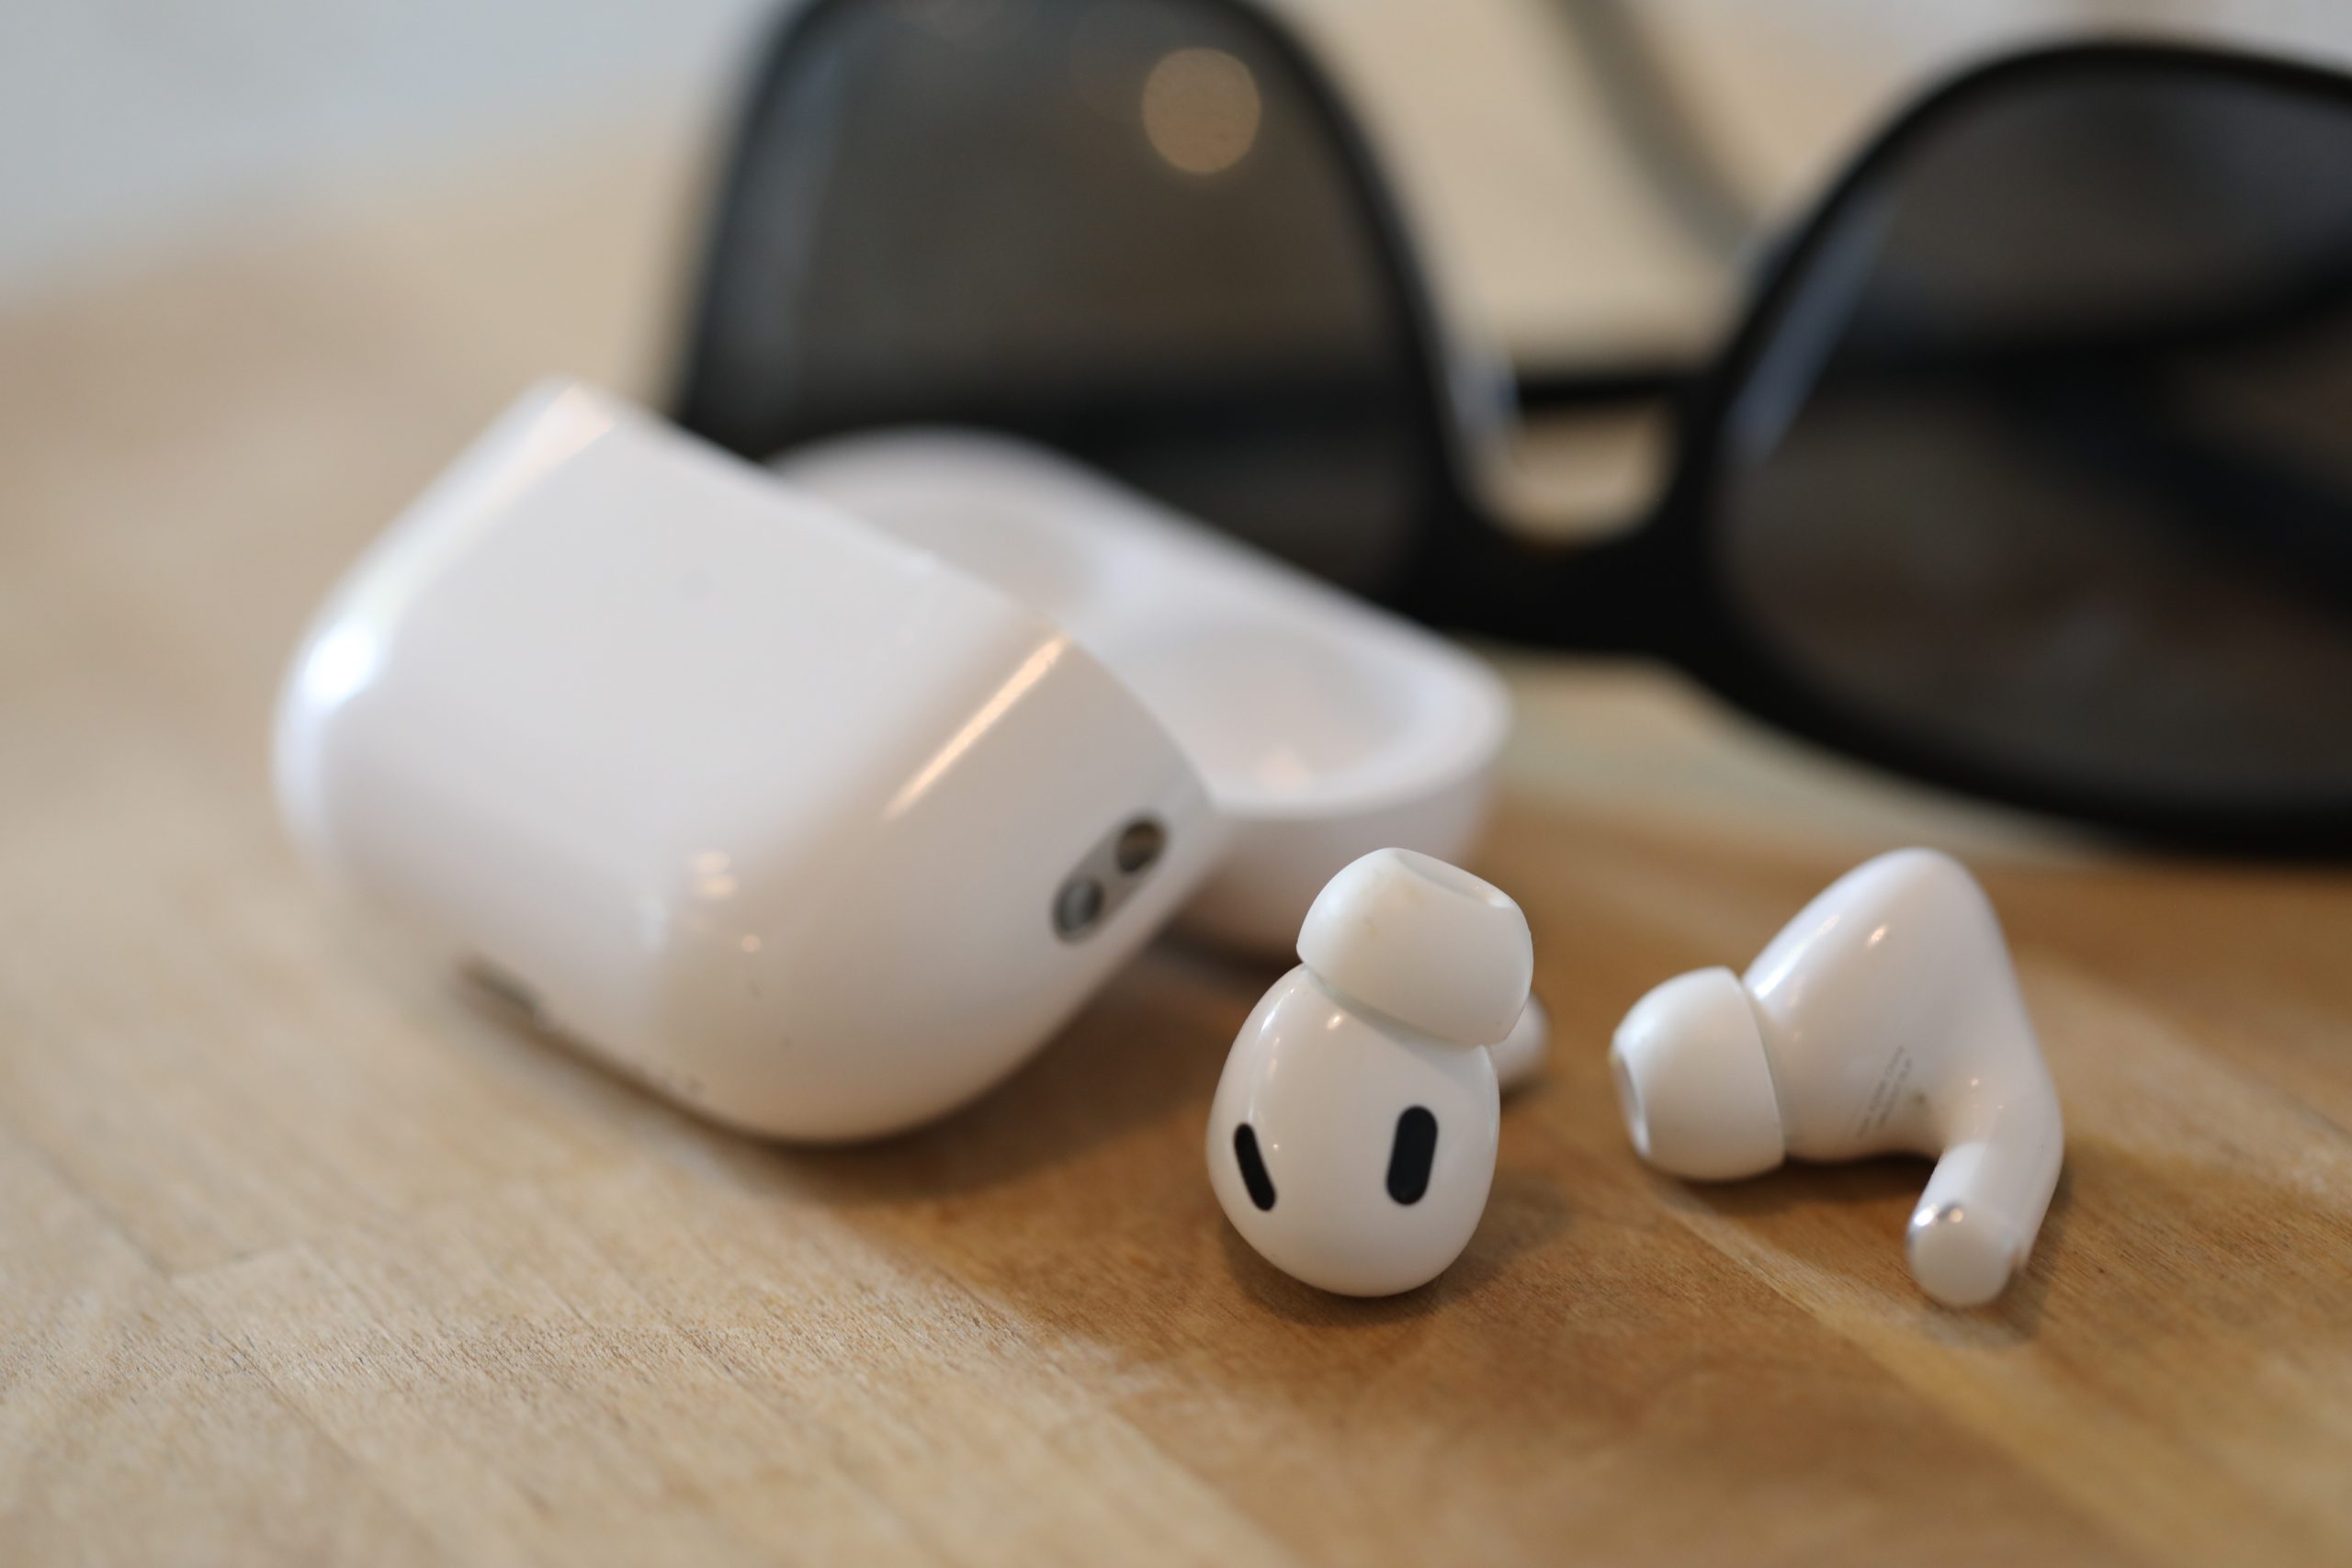 Advantages of AirPods Pro